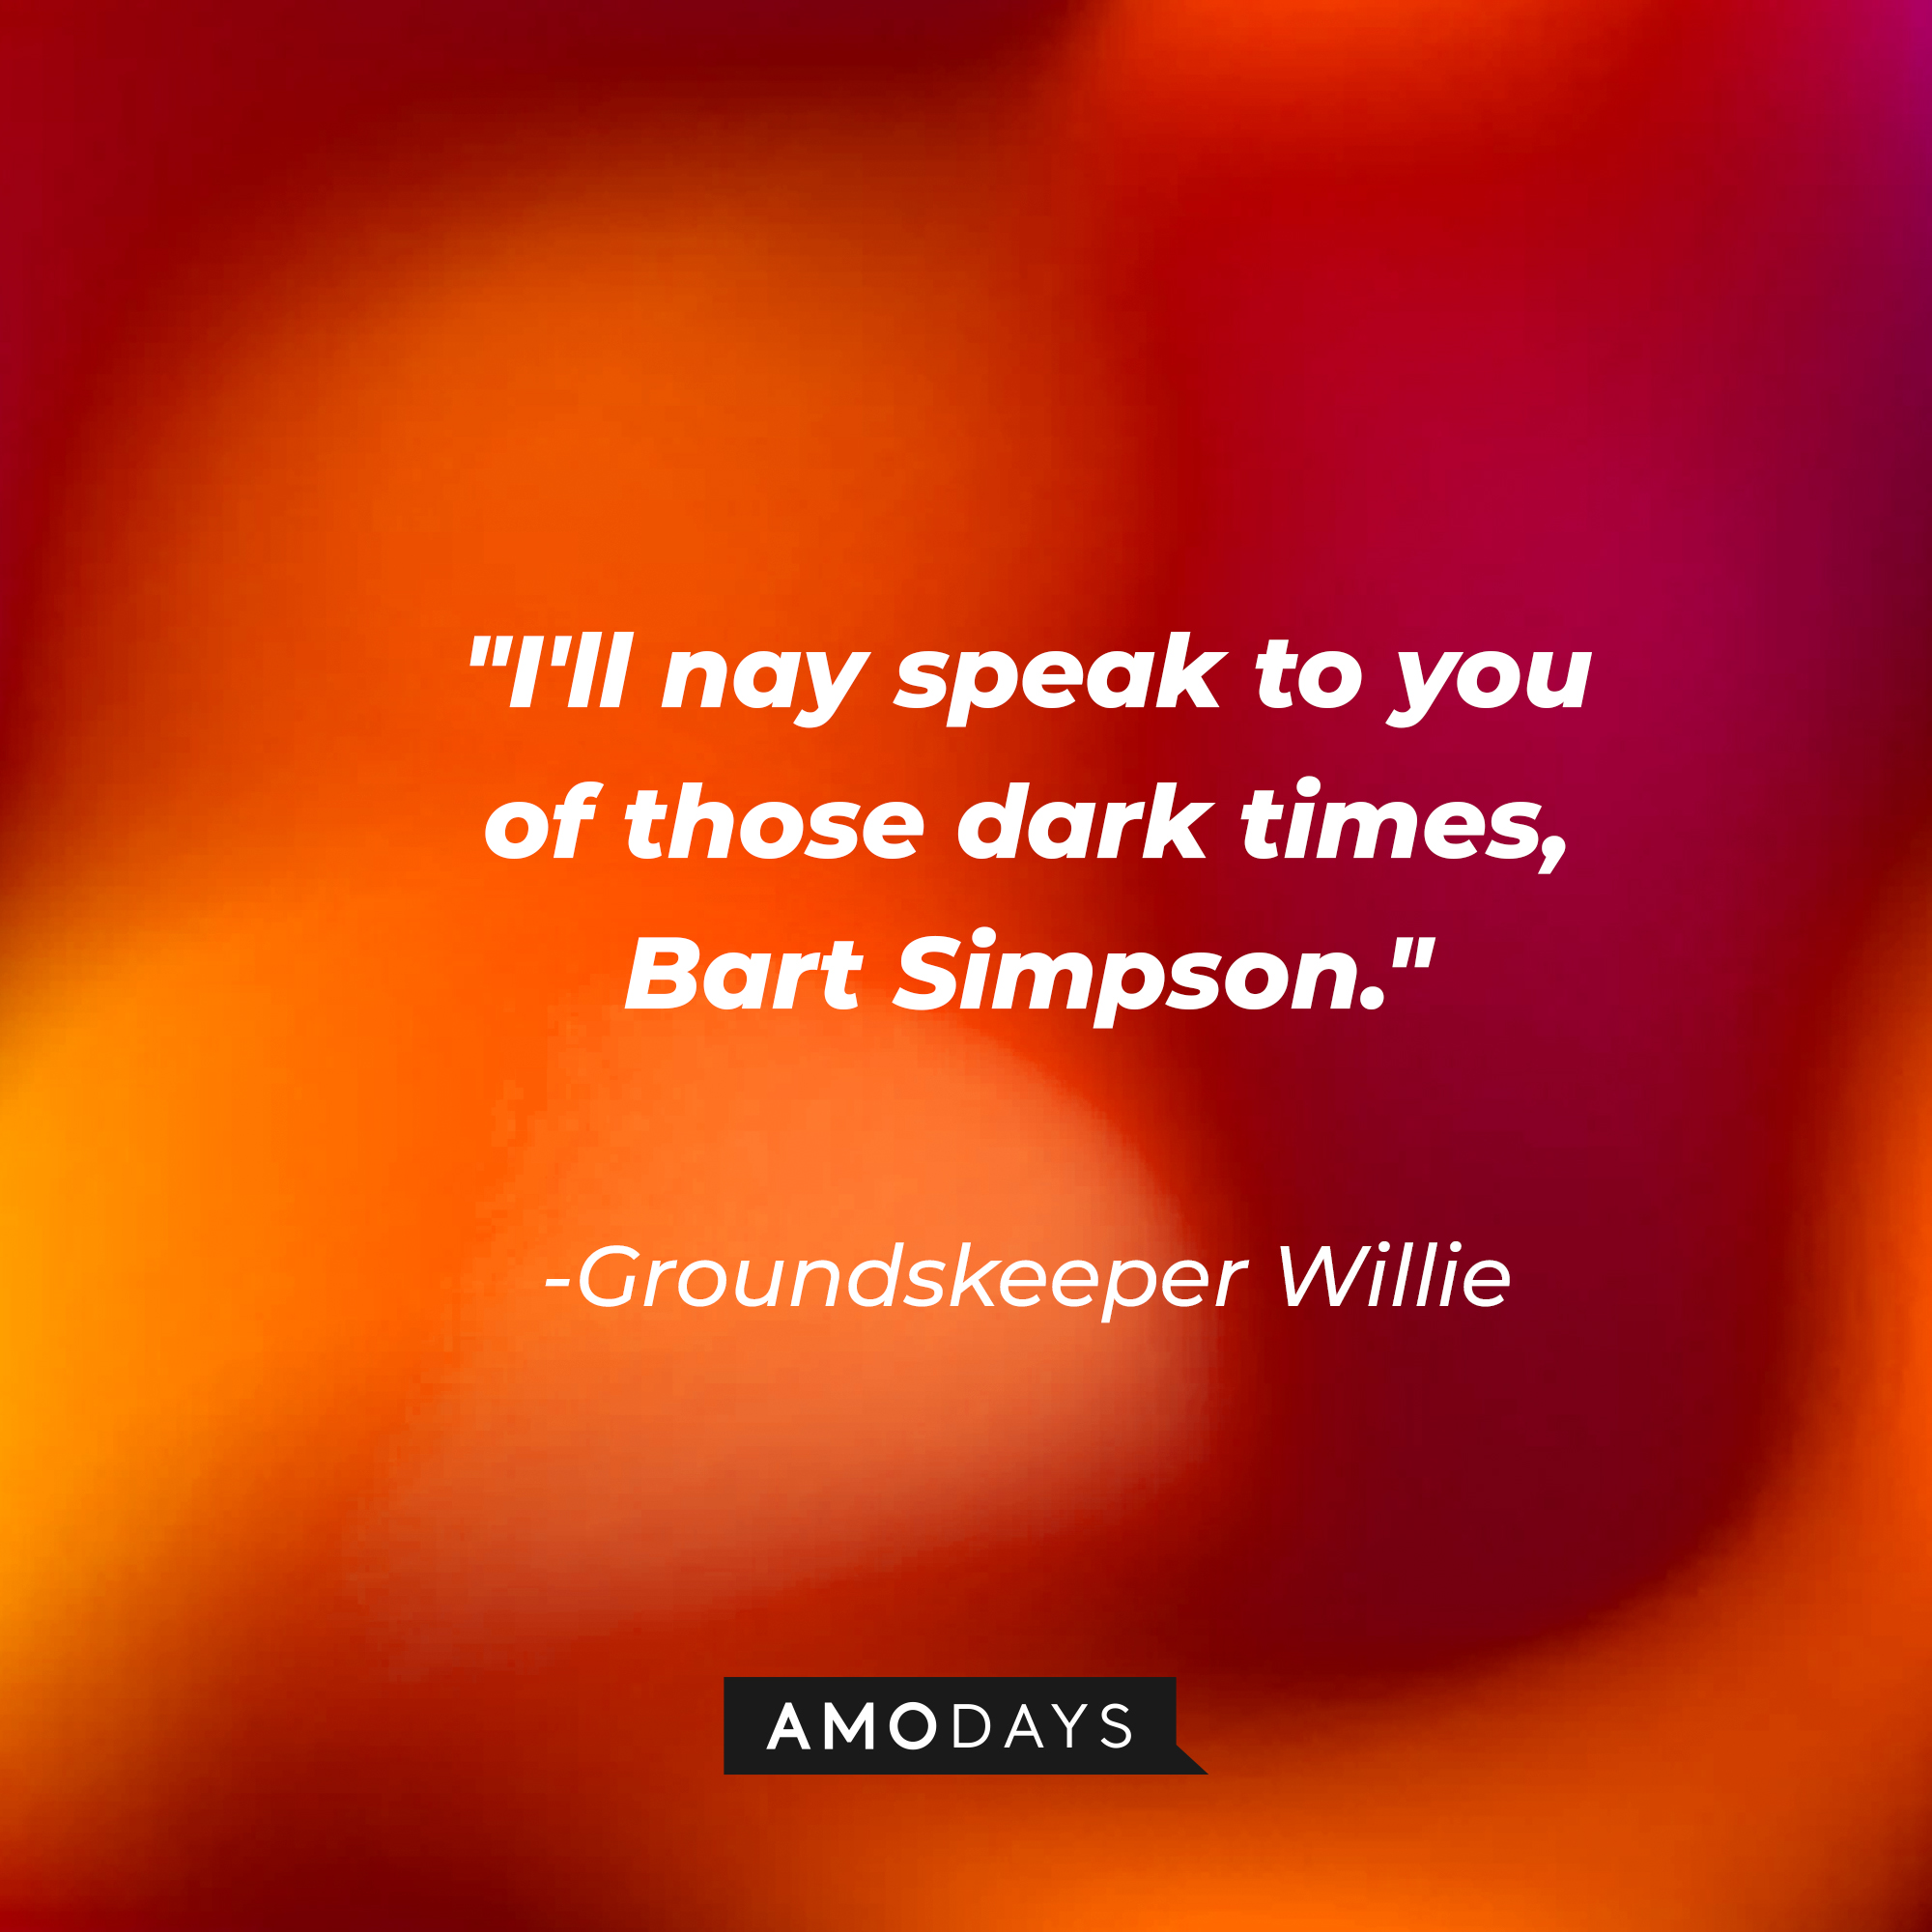 Groundskeeper Willie's quote: "I'll nay speak to you of those dark times, Bart Simpson." | Source: AmoDays